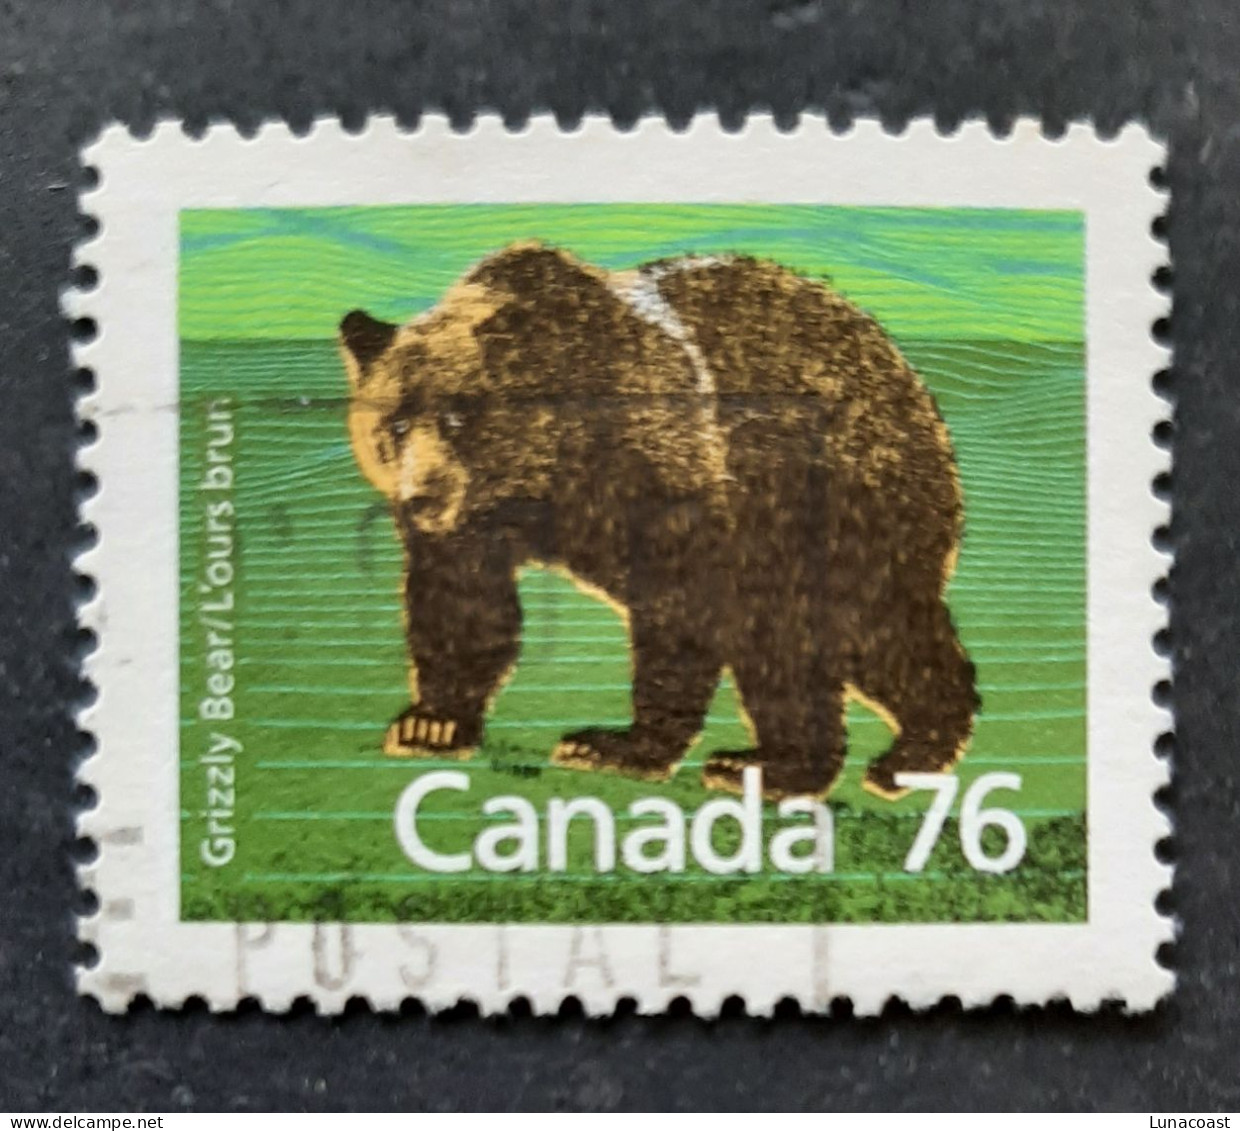 Canada 1989  USED  Sc1178a,   PERF. 12.5 X 13.1,  76c Grizzly Bear, - Gebruikt